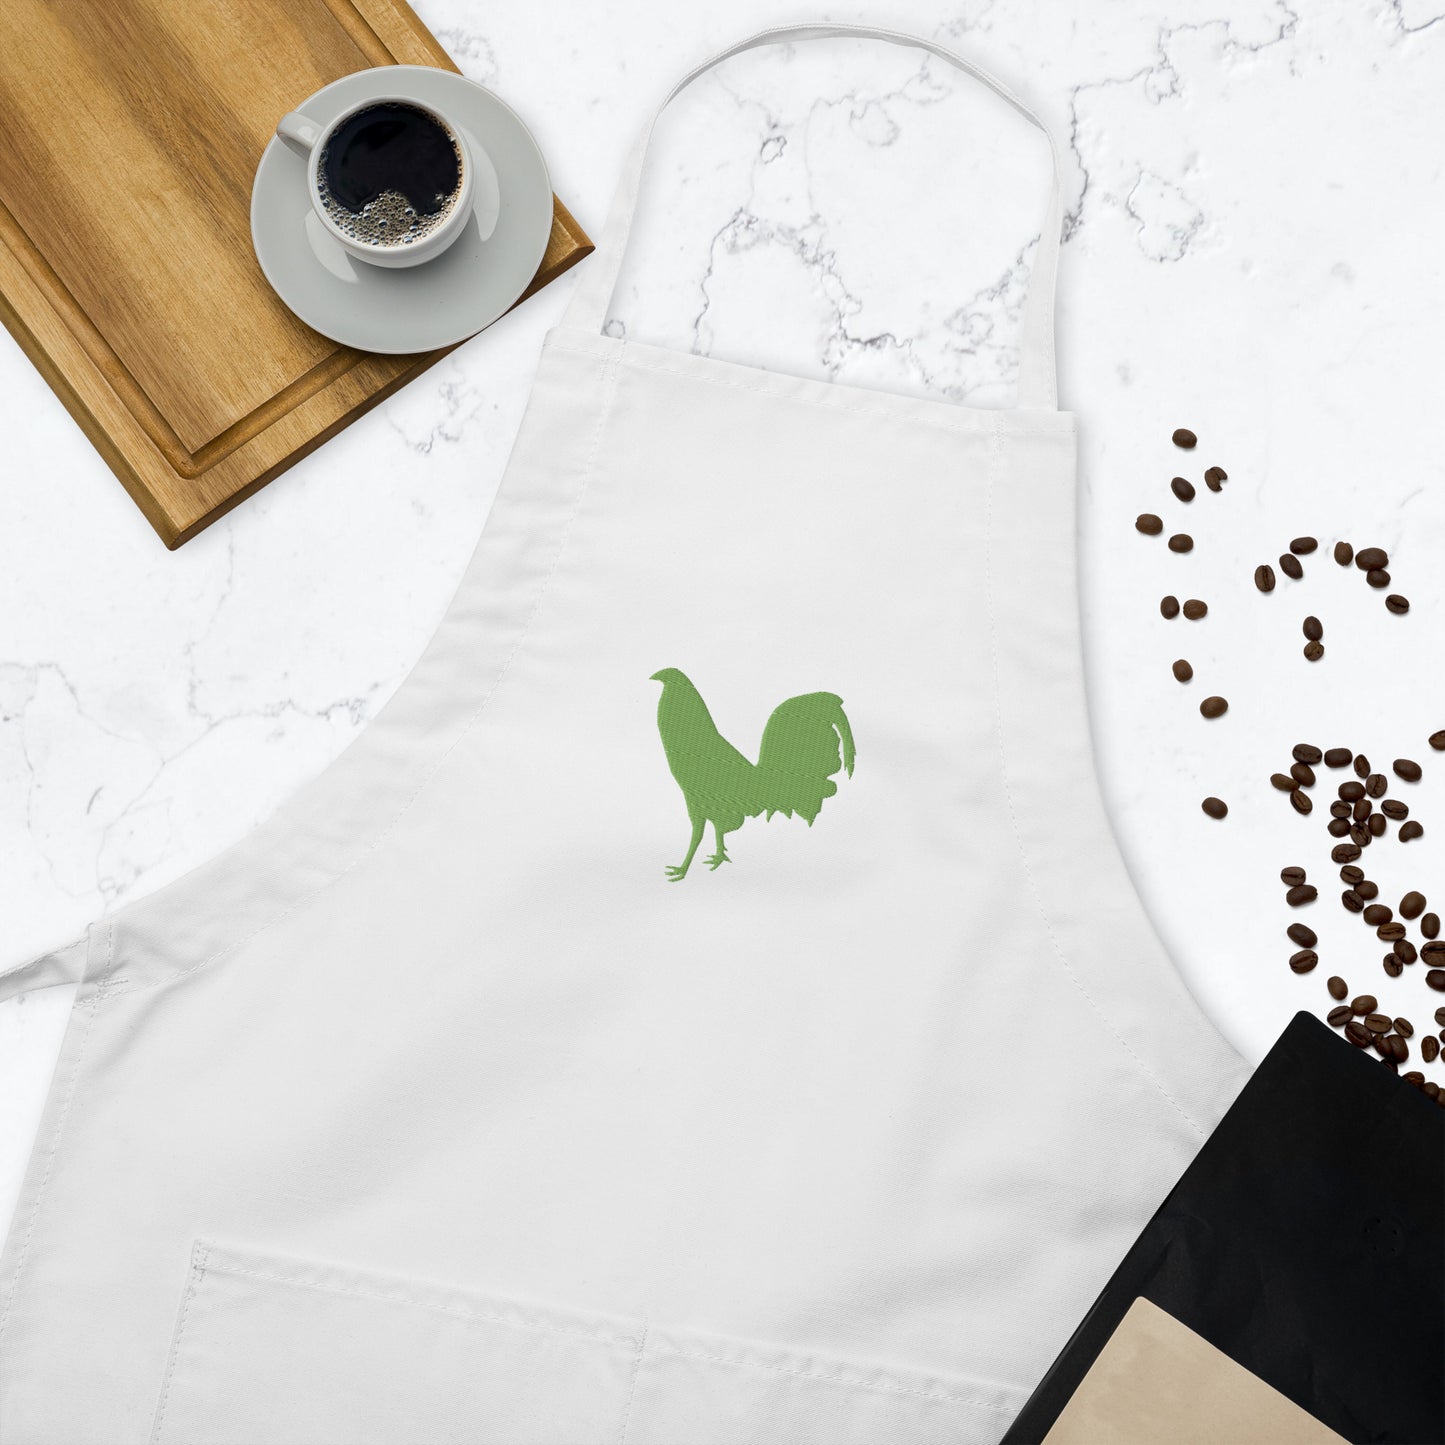 Kiwi Green Cock Gamefowl Rooster Embroidered Apron